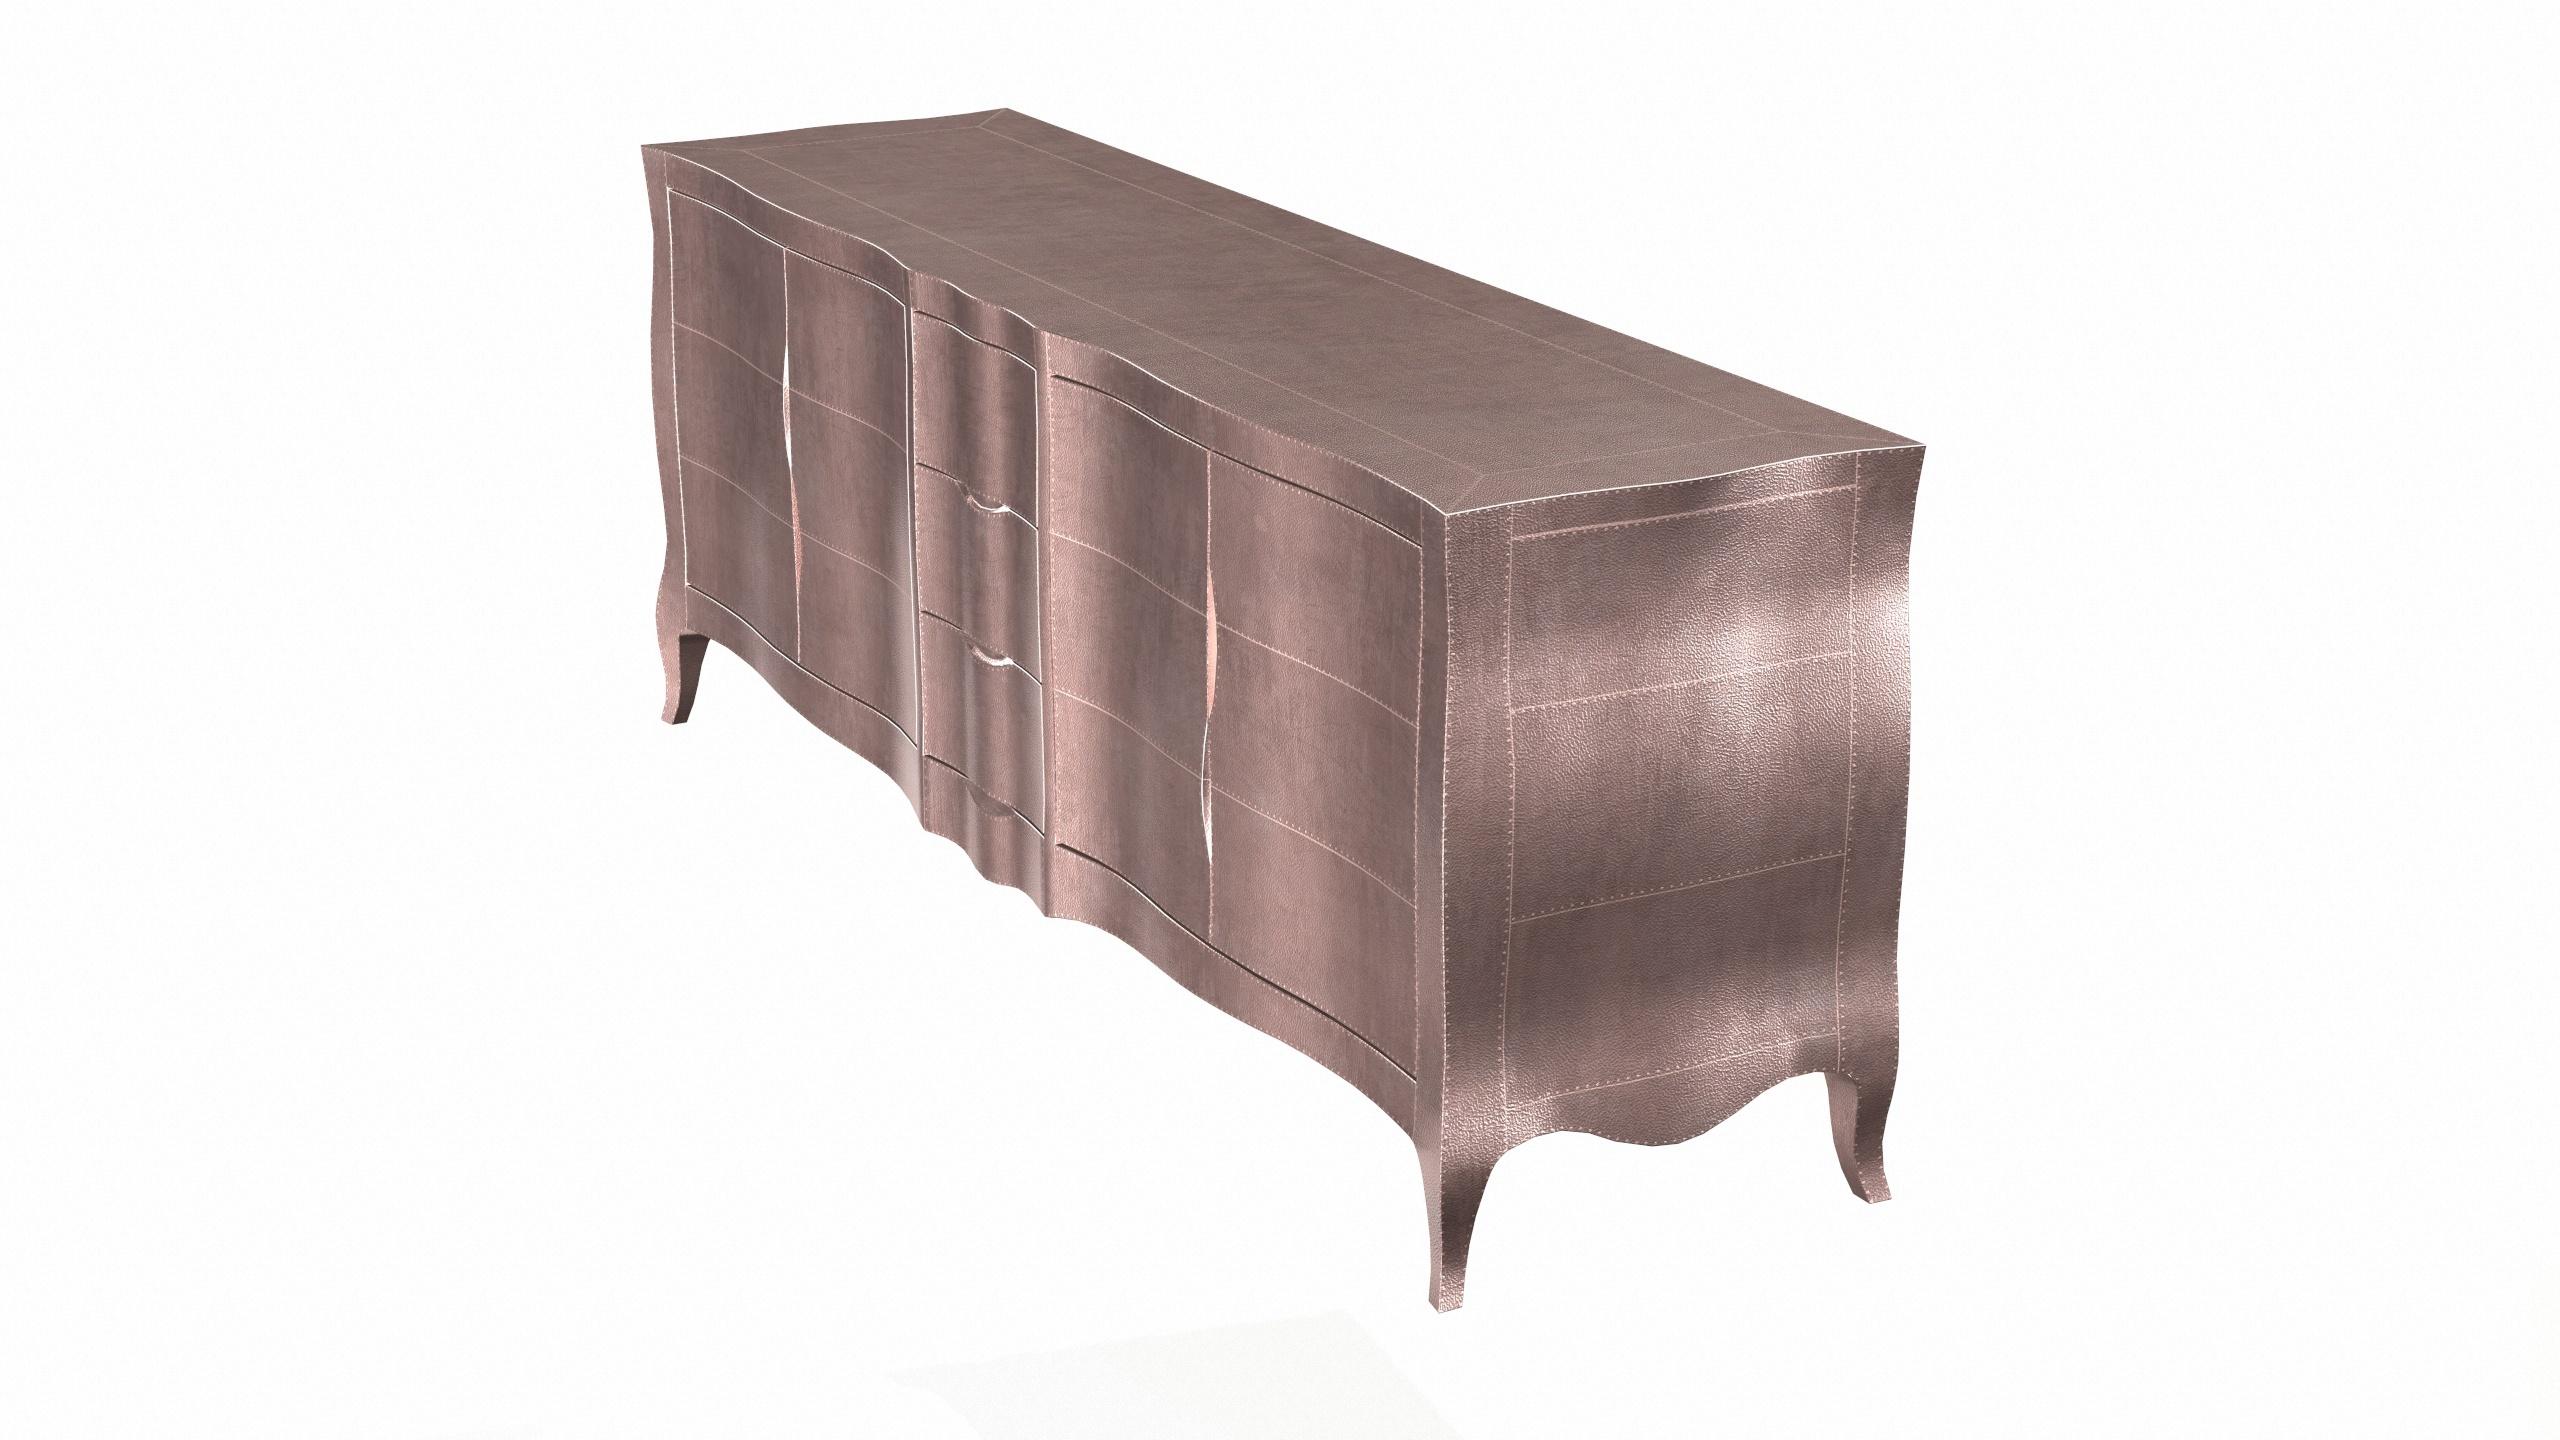 Hand-Carved Louise Credenza Art Deco Cabinets in Fine Hammered Copper by Paul Mathieu For Sale